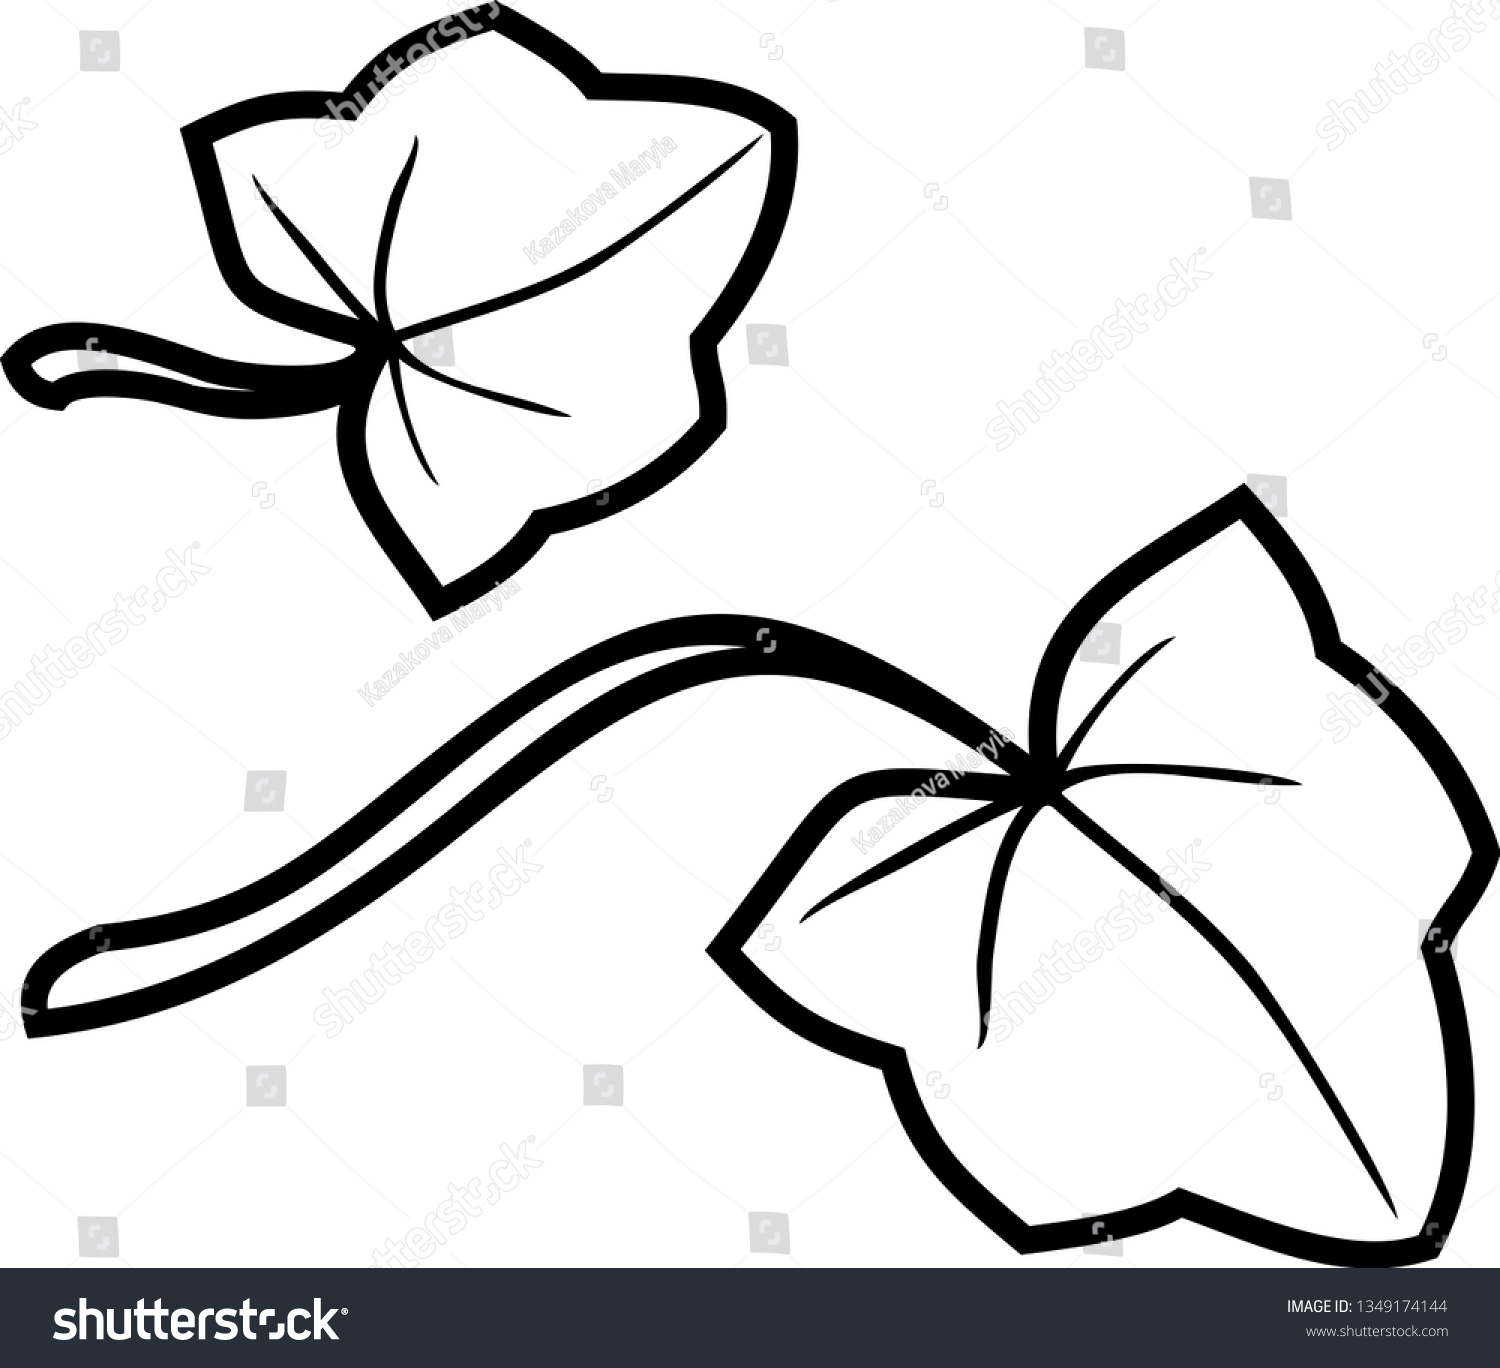 Coloring page pumpkin leaves stock vector royalty free